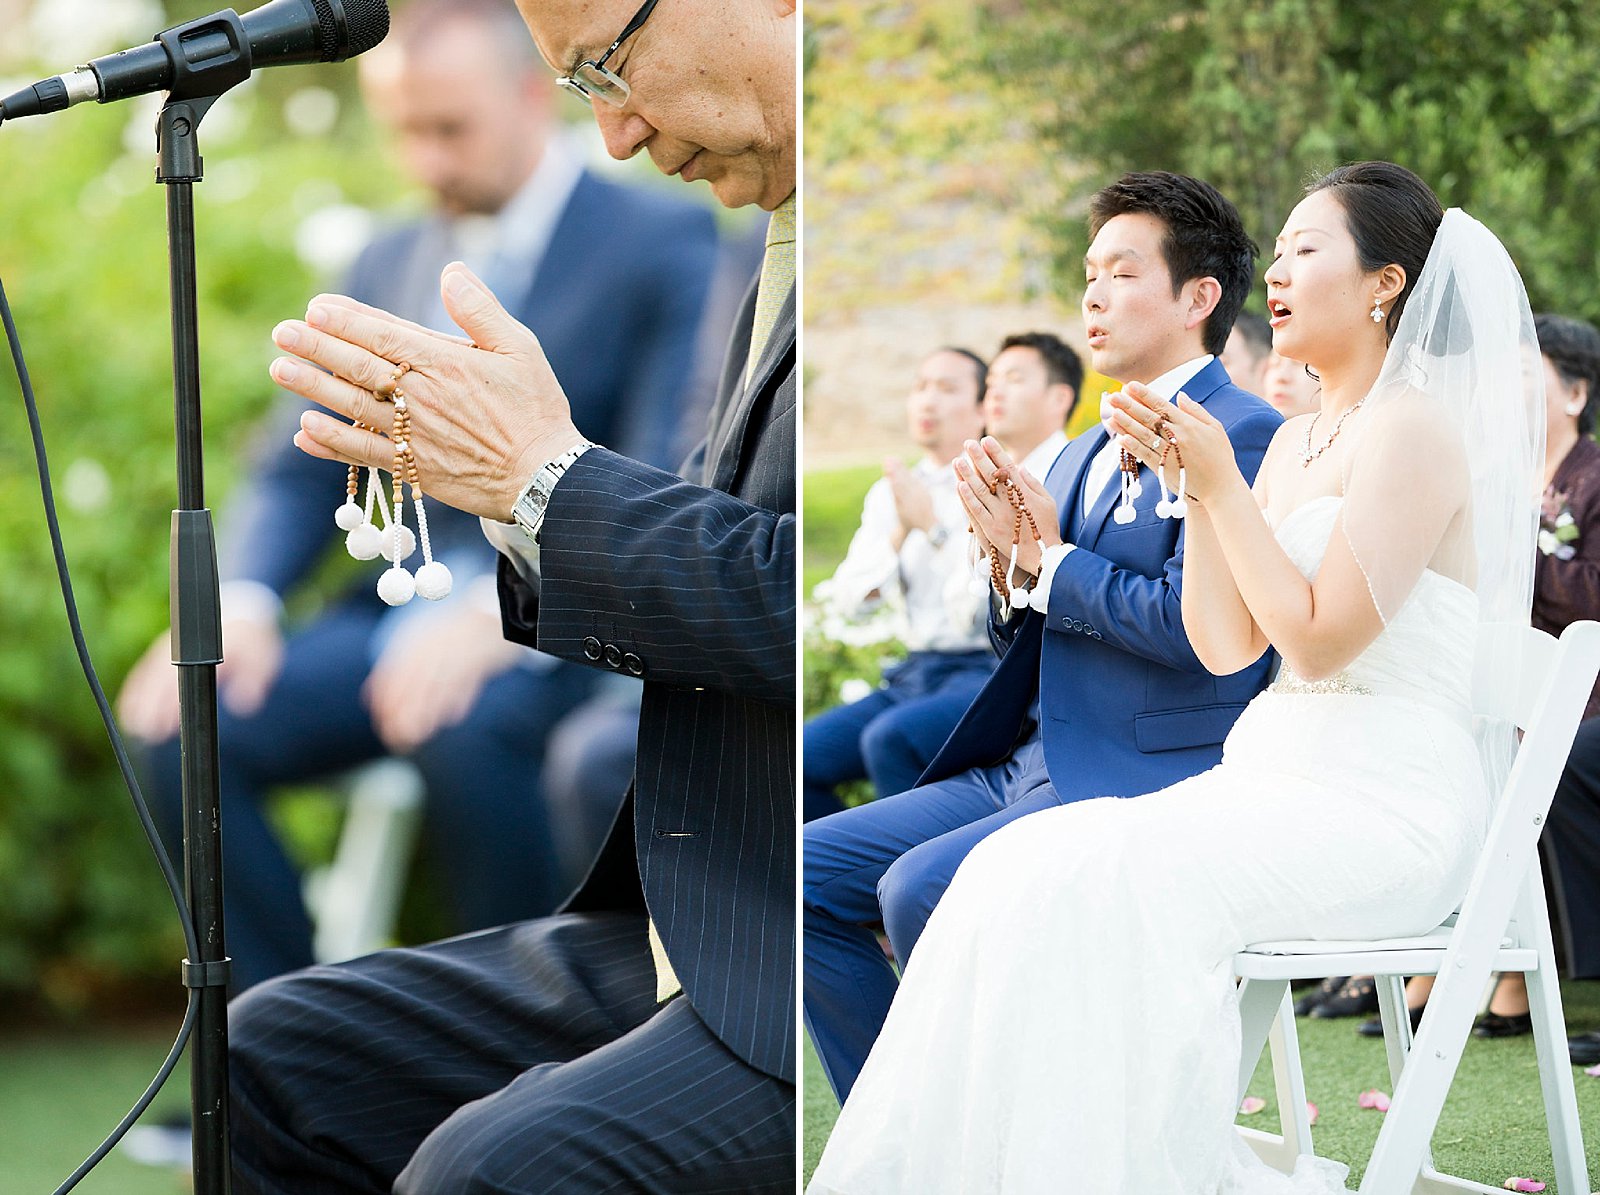 Buddhist wedding traditions photographed by Randi Michelle Photography